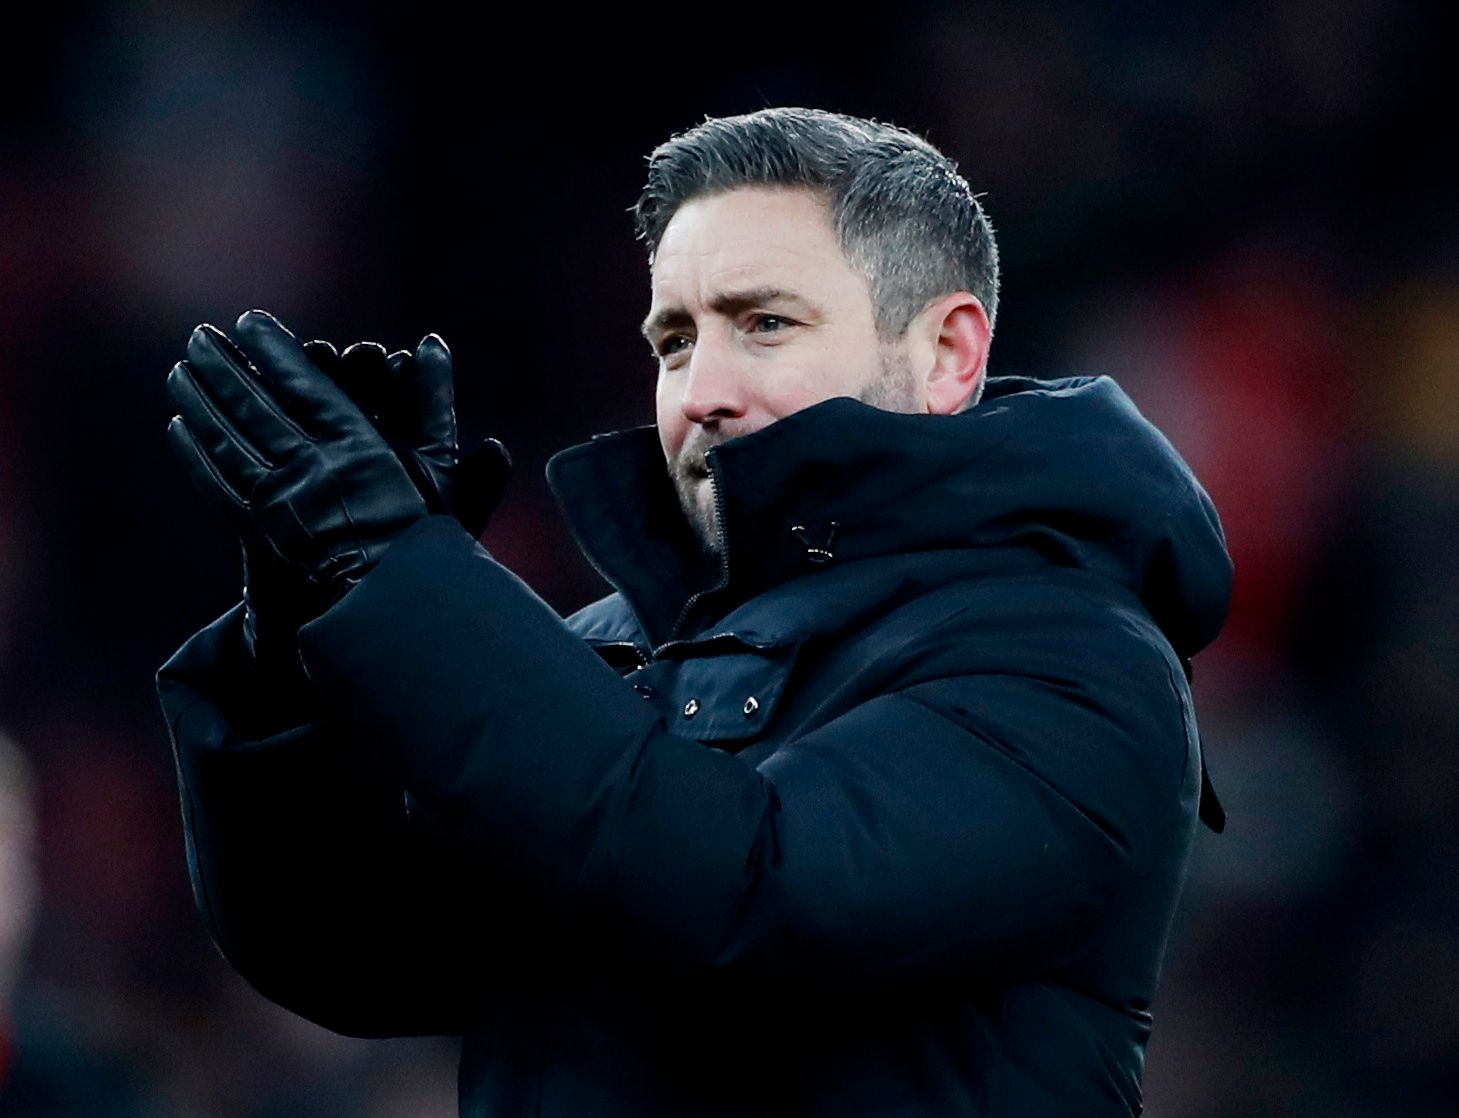 Soccer Football - Carabao Cup - Quarter Final - Arsenal v Sunderland - Emirates Stadium, London, Britain - December 21, 2021 Sunderland manager Lee Johnson applauds fans after the match Action Images via Reuters/Lee Smith EDITORIAL USE ONLY. No use with unauthorized audio, video, data, fixture lists, club/league logos or 'live' services. Online in-match use limited to 75 images, no video emulation. No use in betting, games or single club /league/player publications.  Please contact your account 